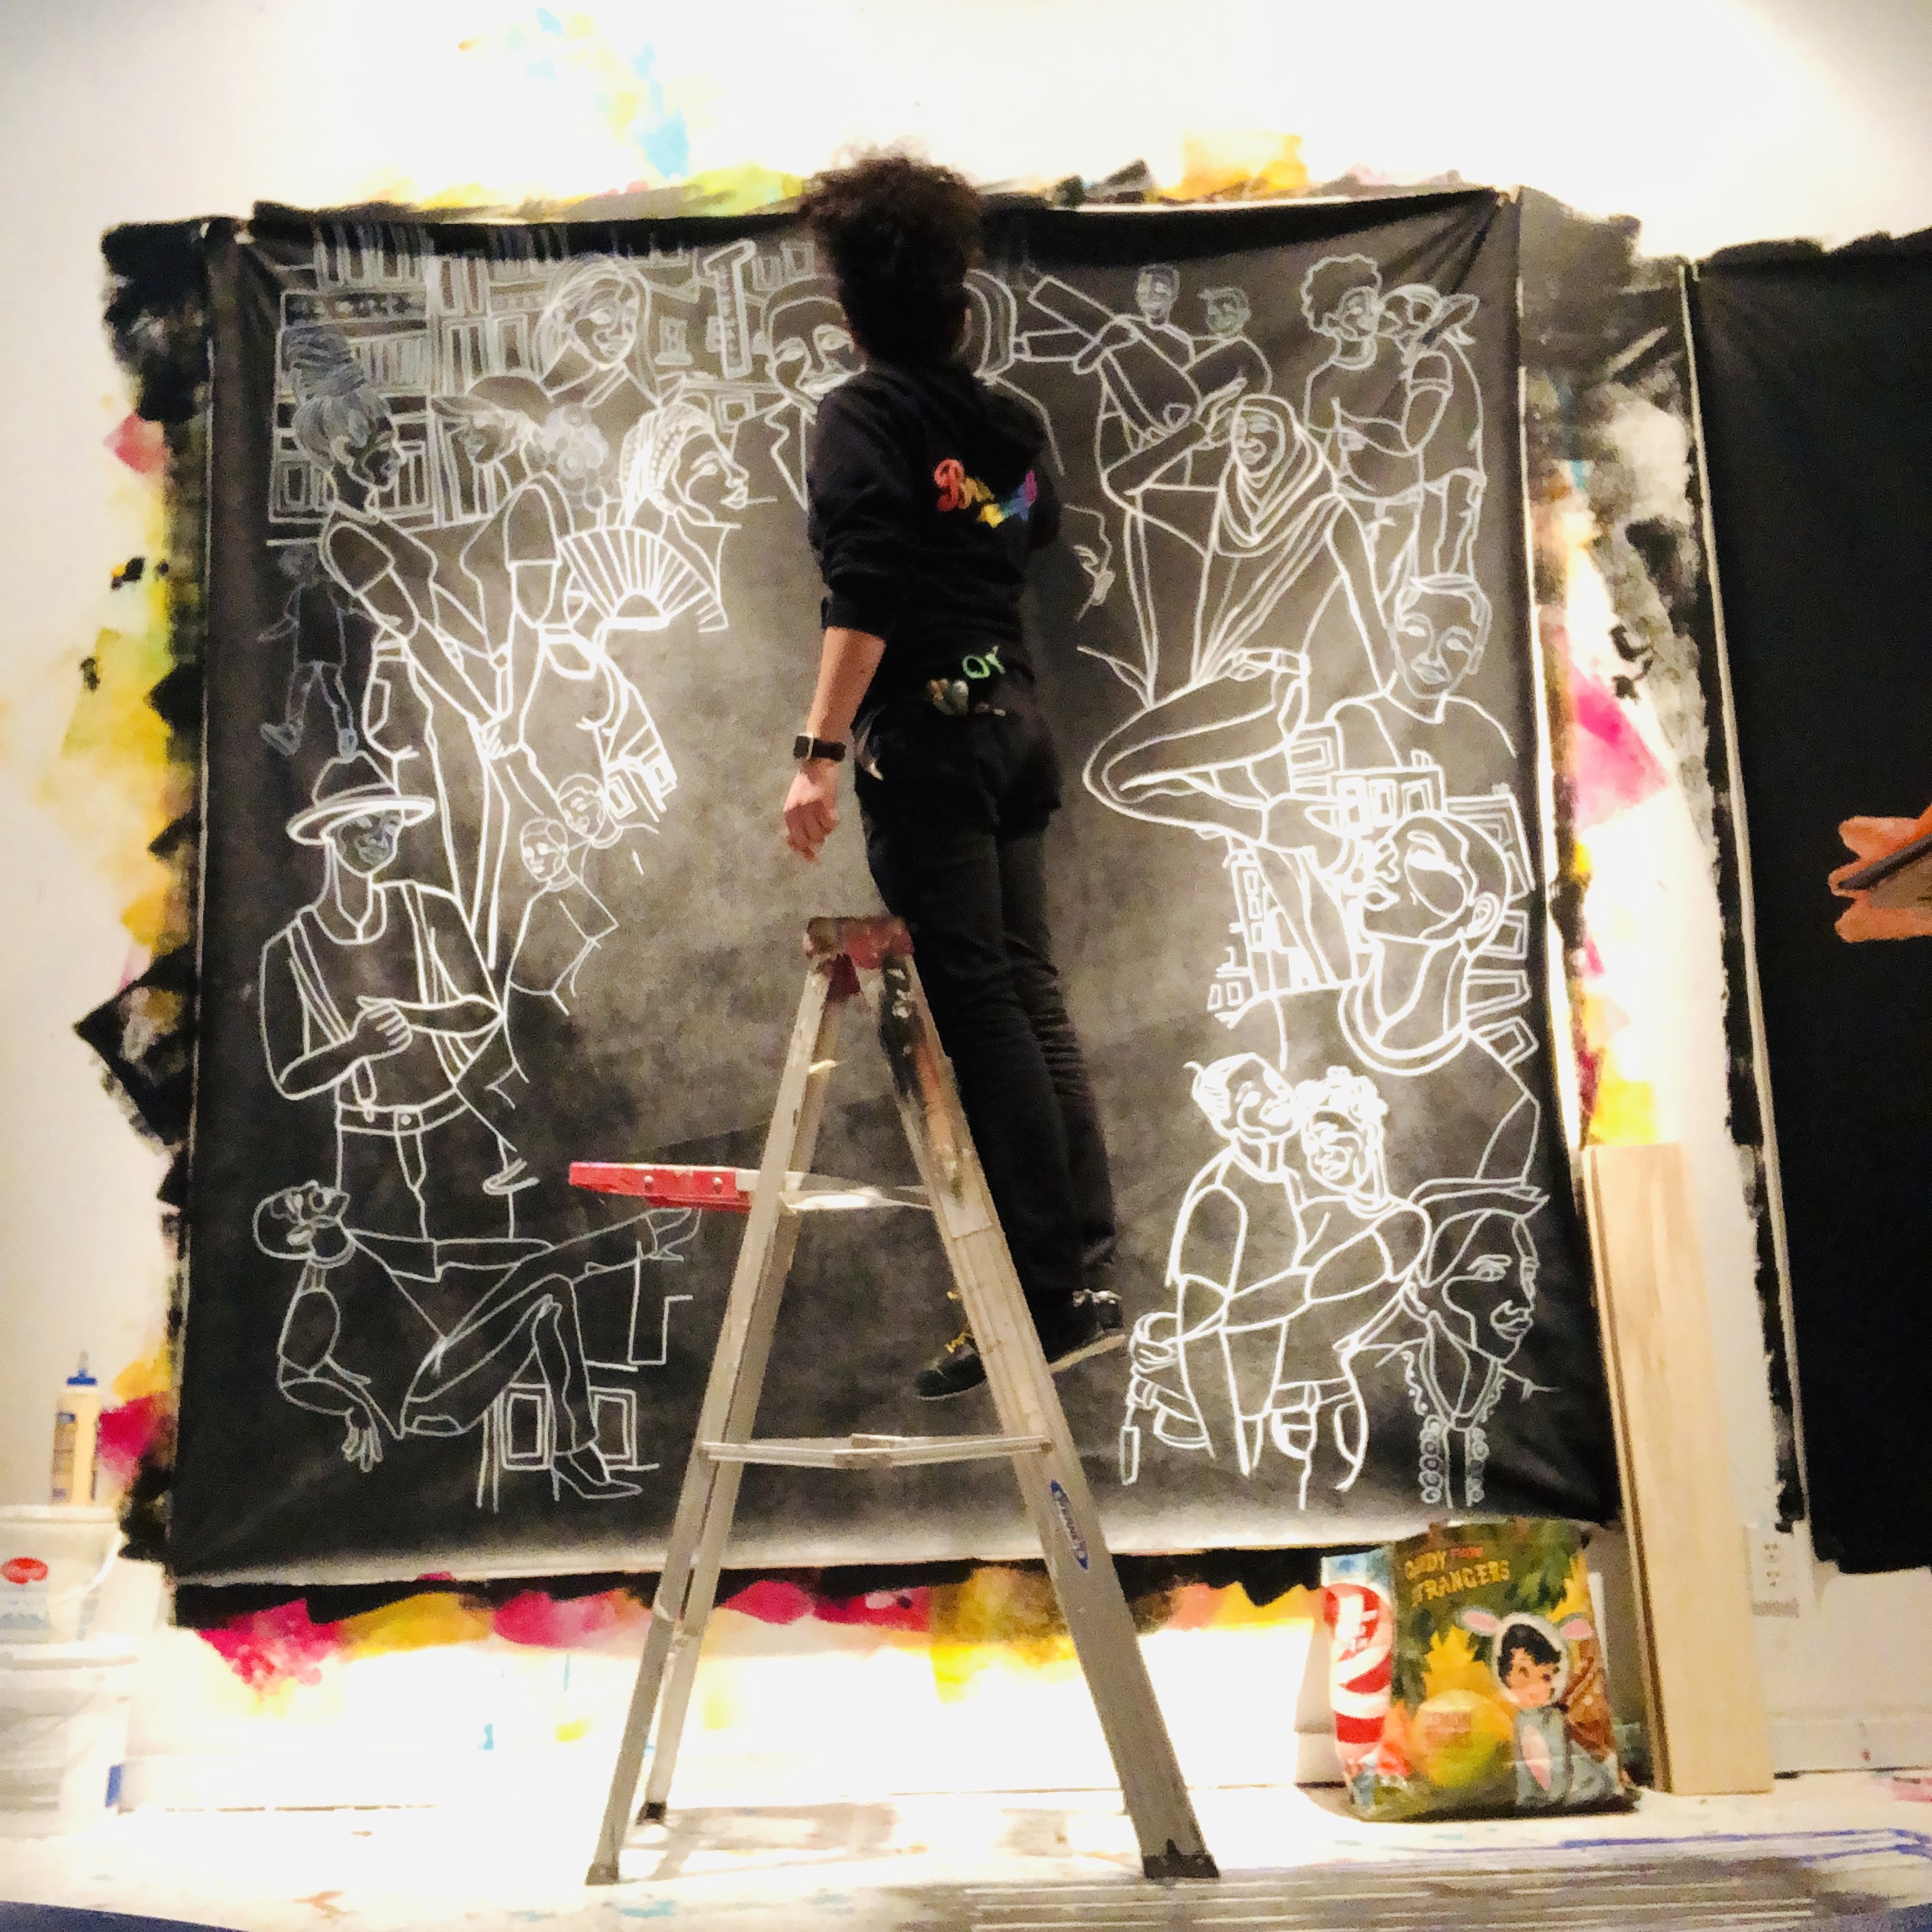 Image: The artist Sam Kirk standing on a ladder and painting a canvas in progress – a black background with white figures. Image courtesy of artist.